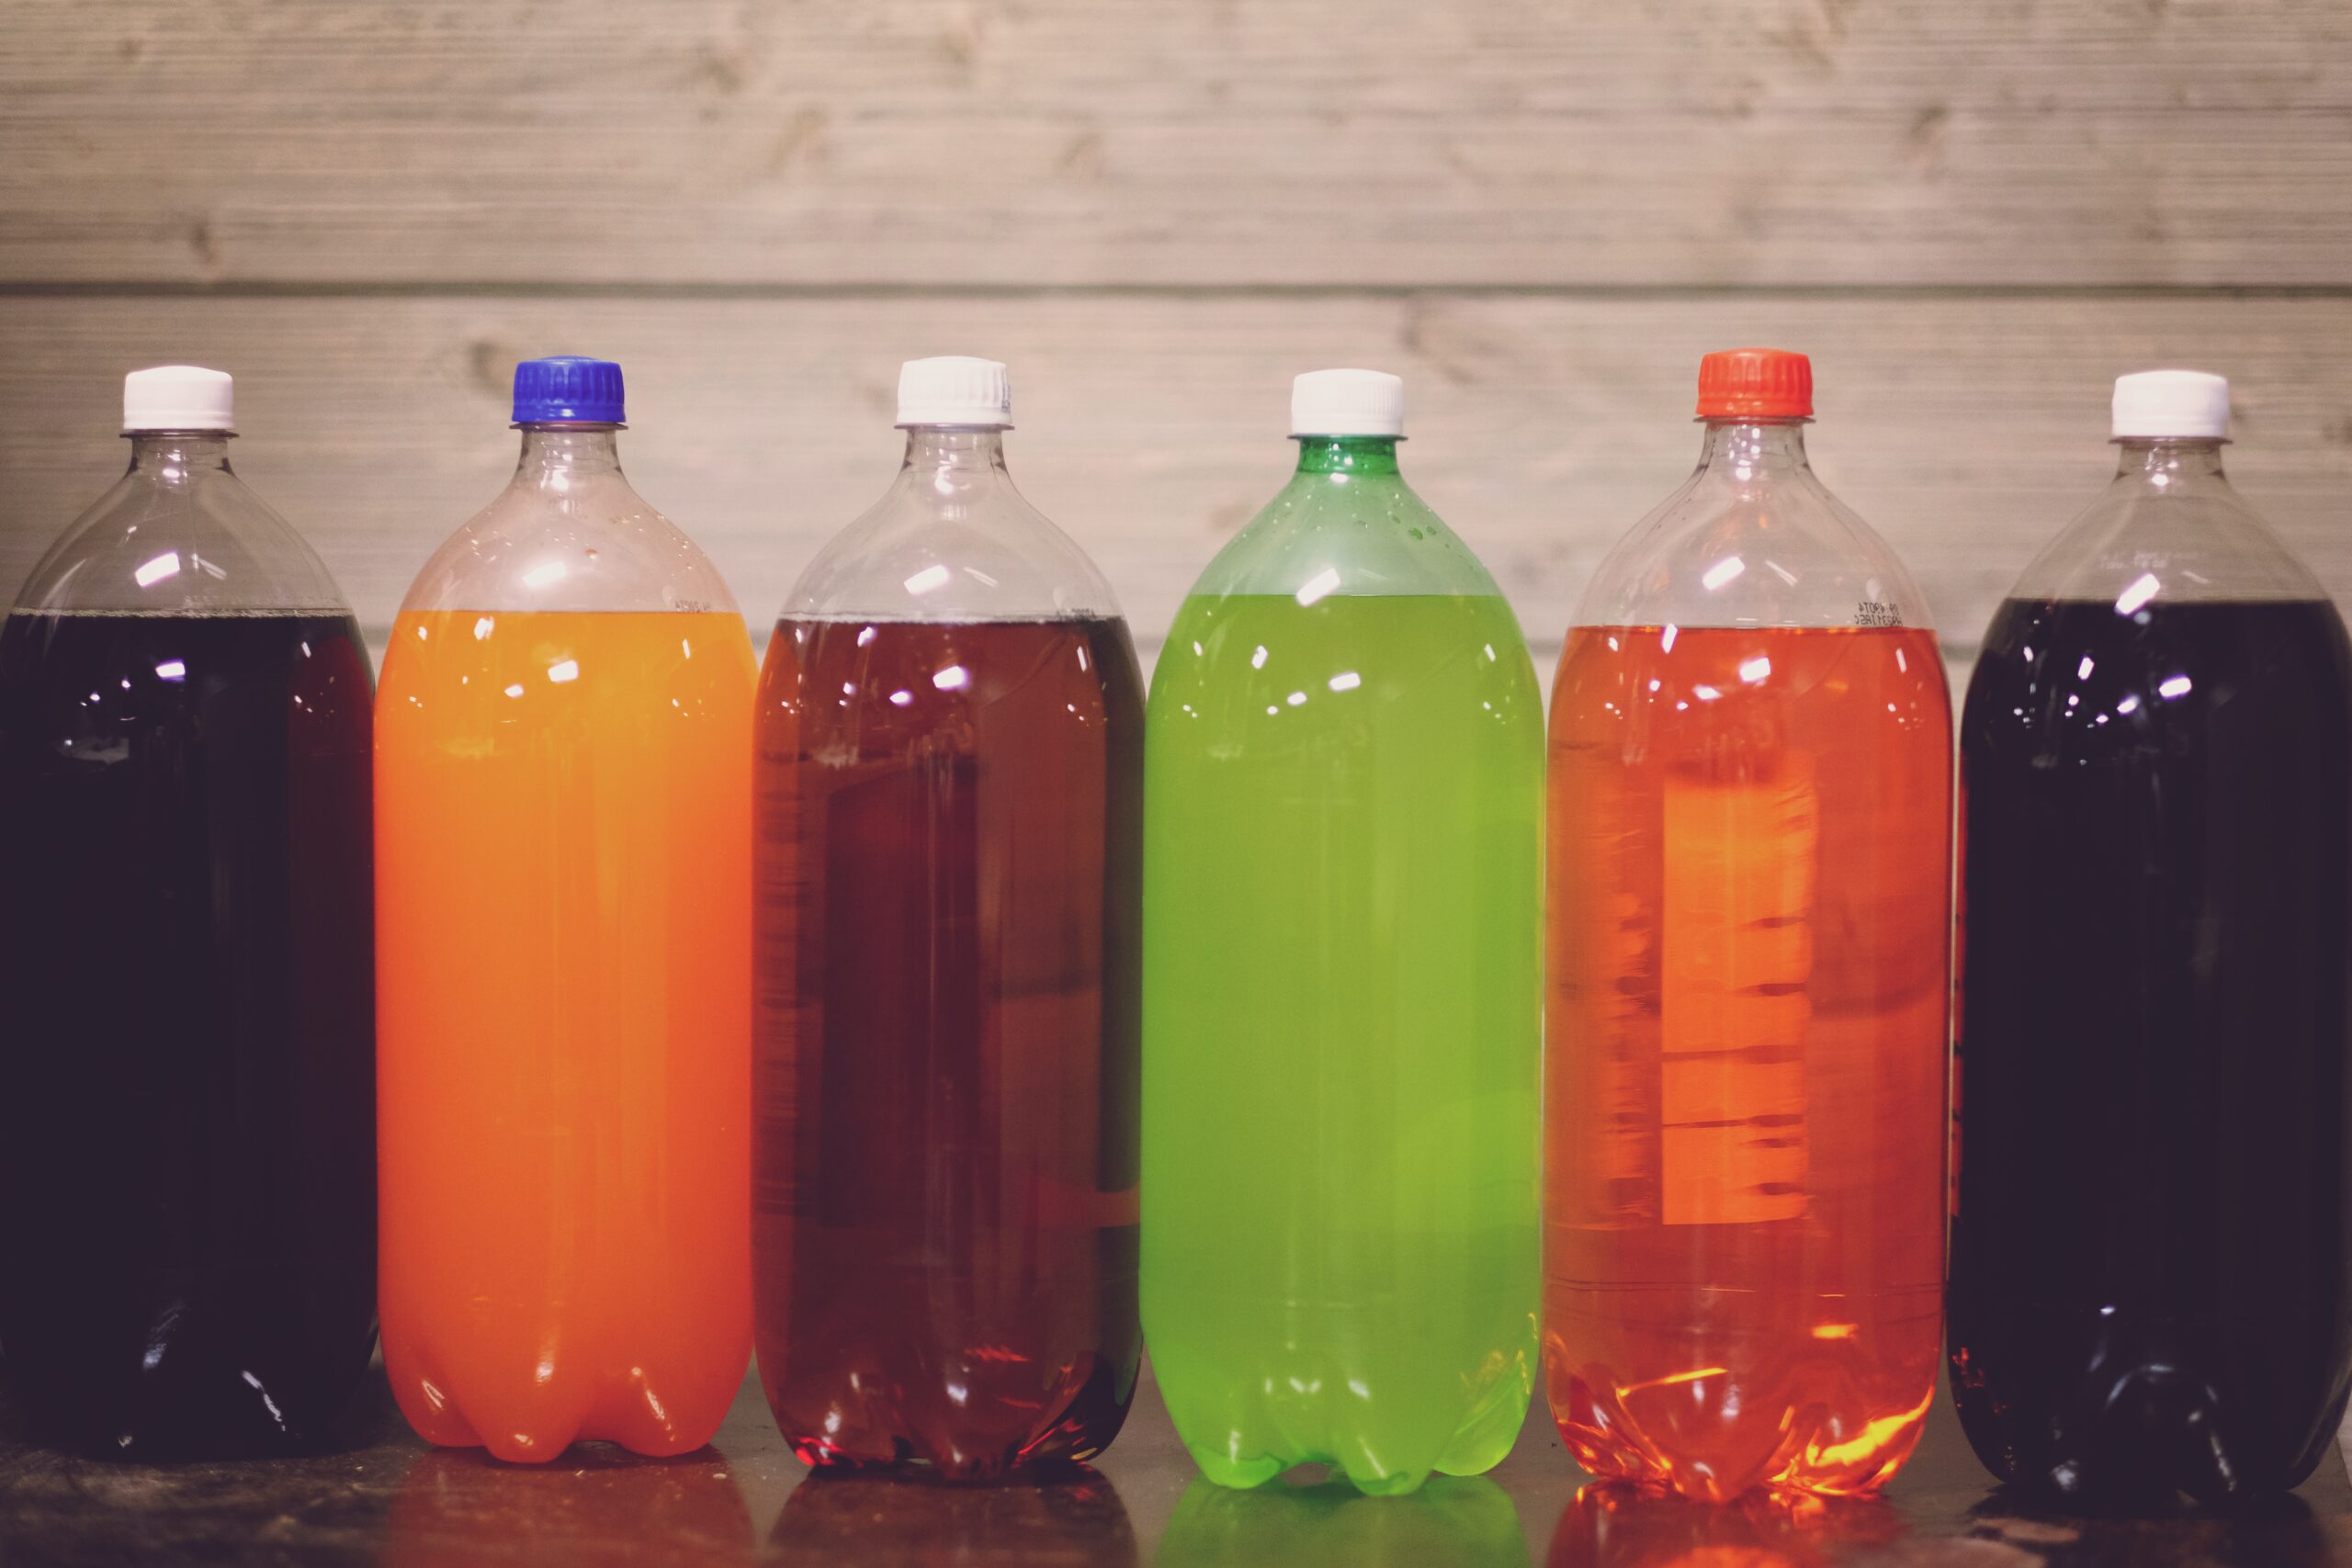 Re-fizz: How to repurpose old soda bottles